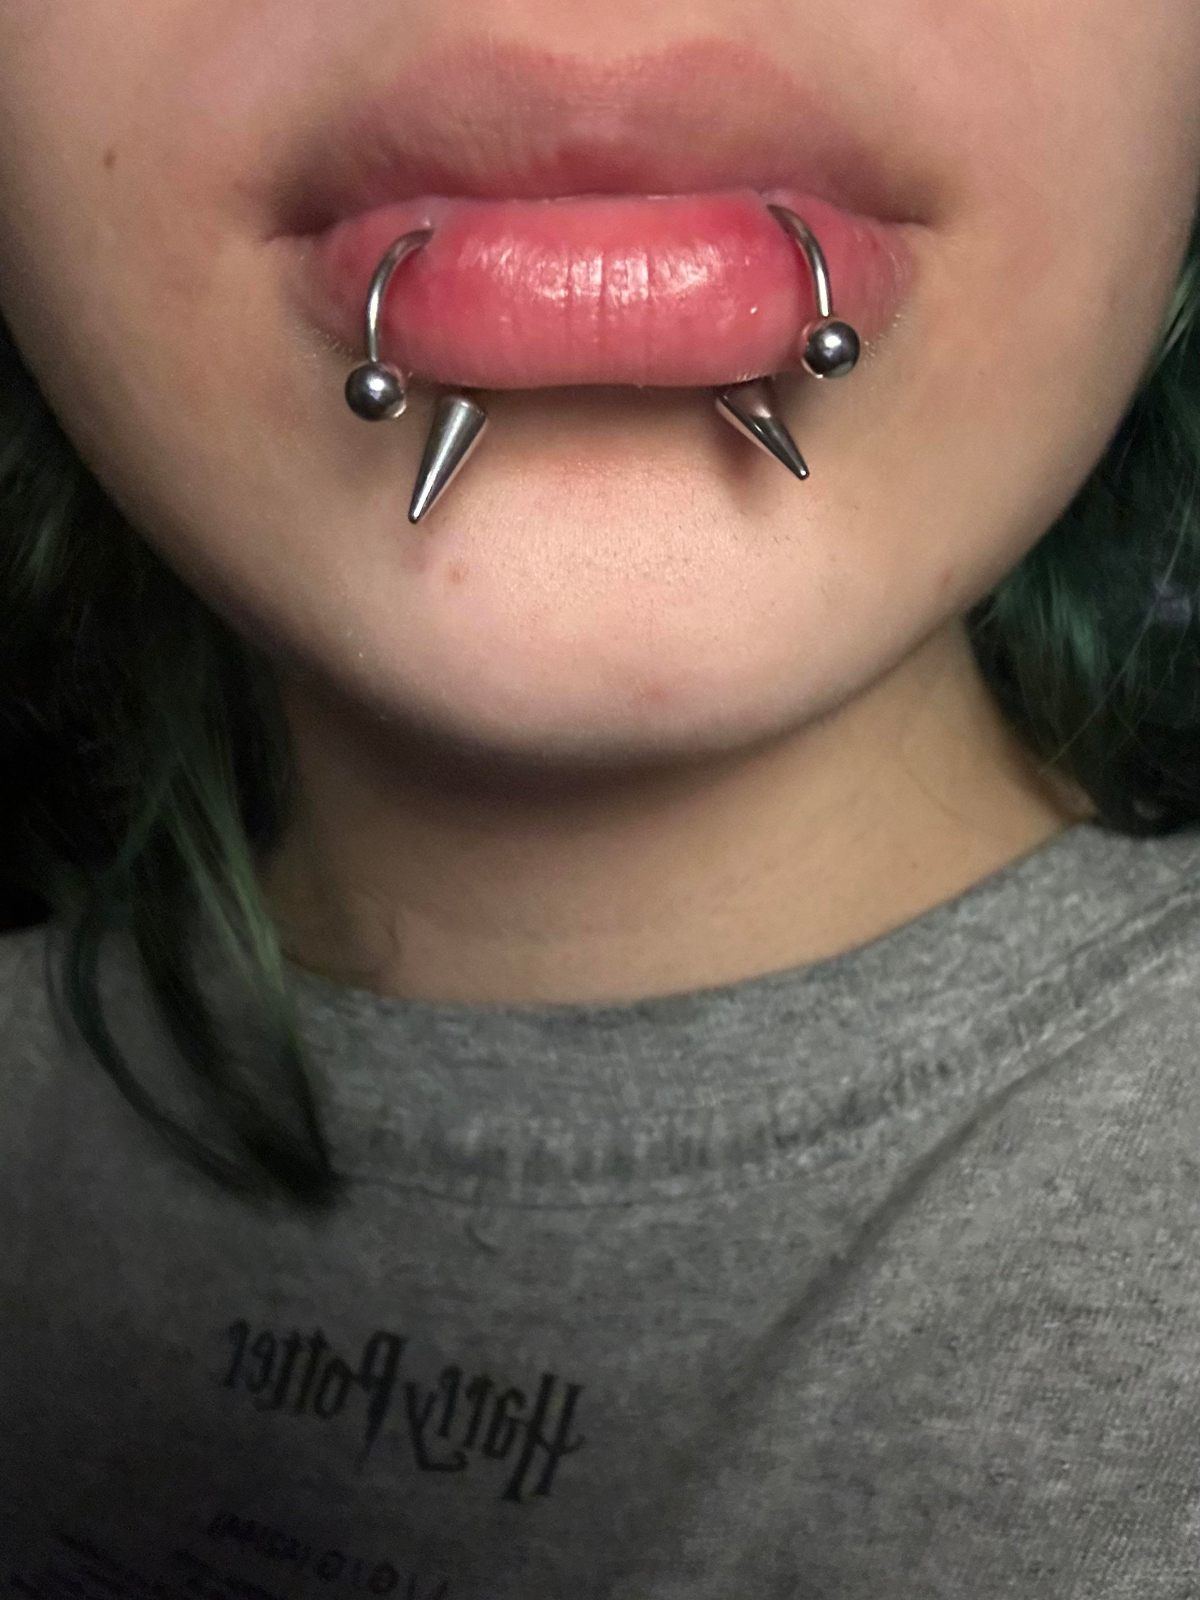 how much are snake bite piercings